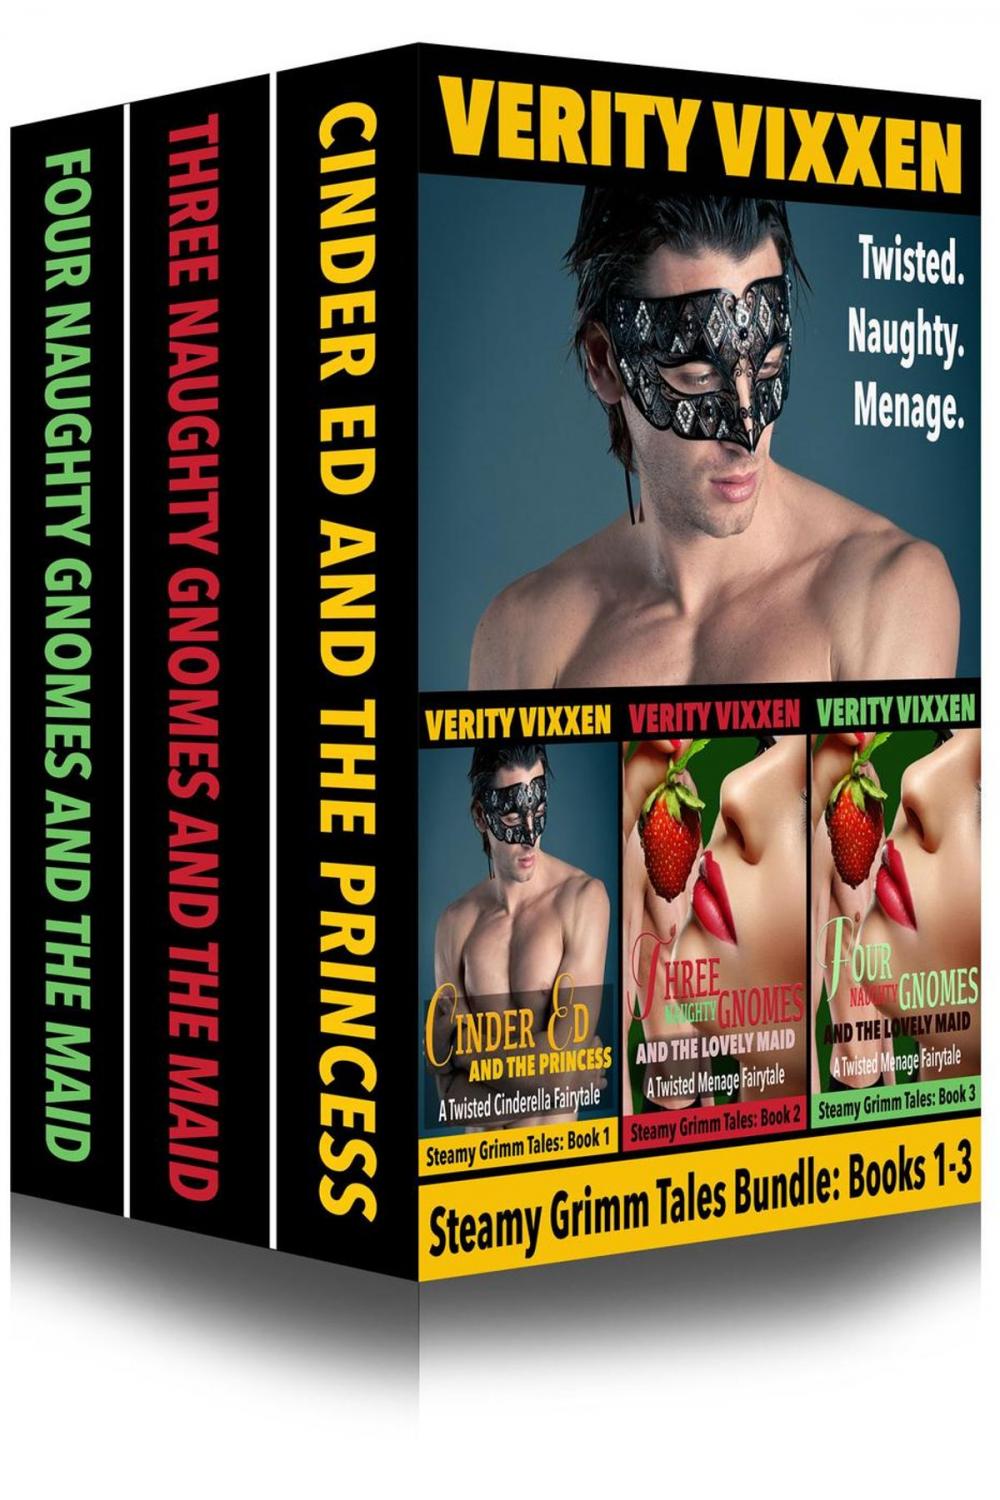 Big bigCover of Steamy Grimm Tales Bundle (Book 1-3) Cinder Ed and the Princess, Three Naughty Gnomes and the Lovely Maid, Four Naughty Gnomes and the Lovely Maid